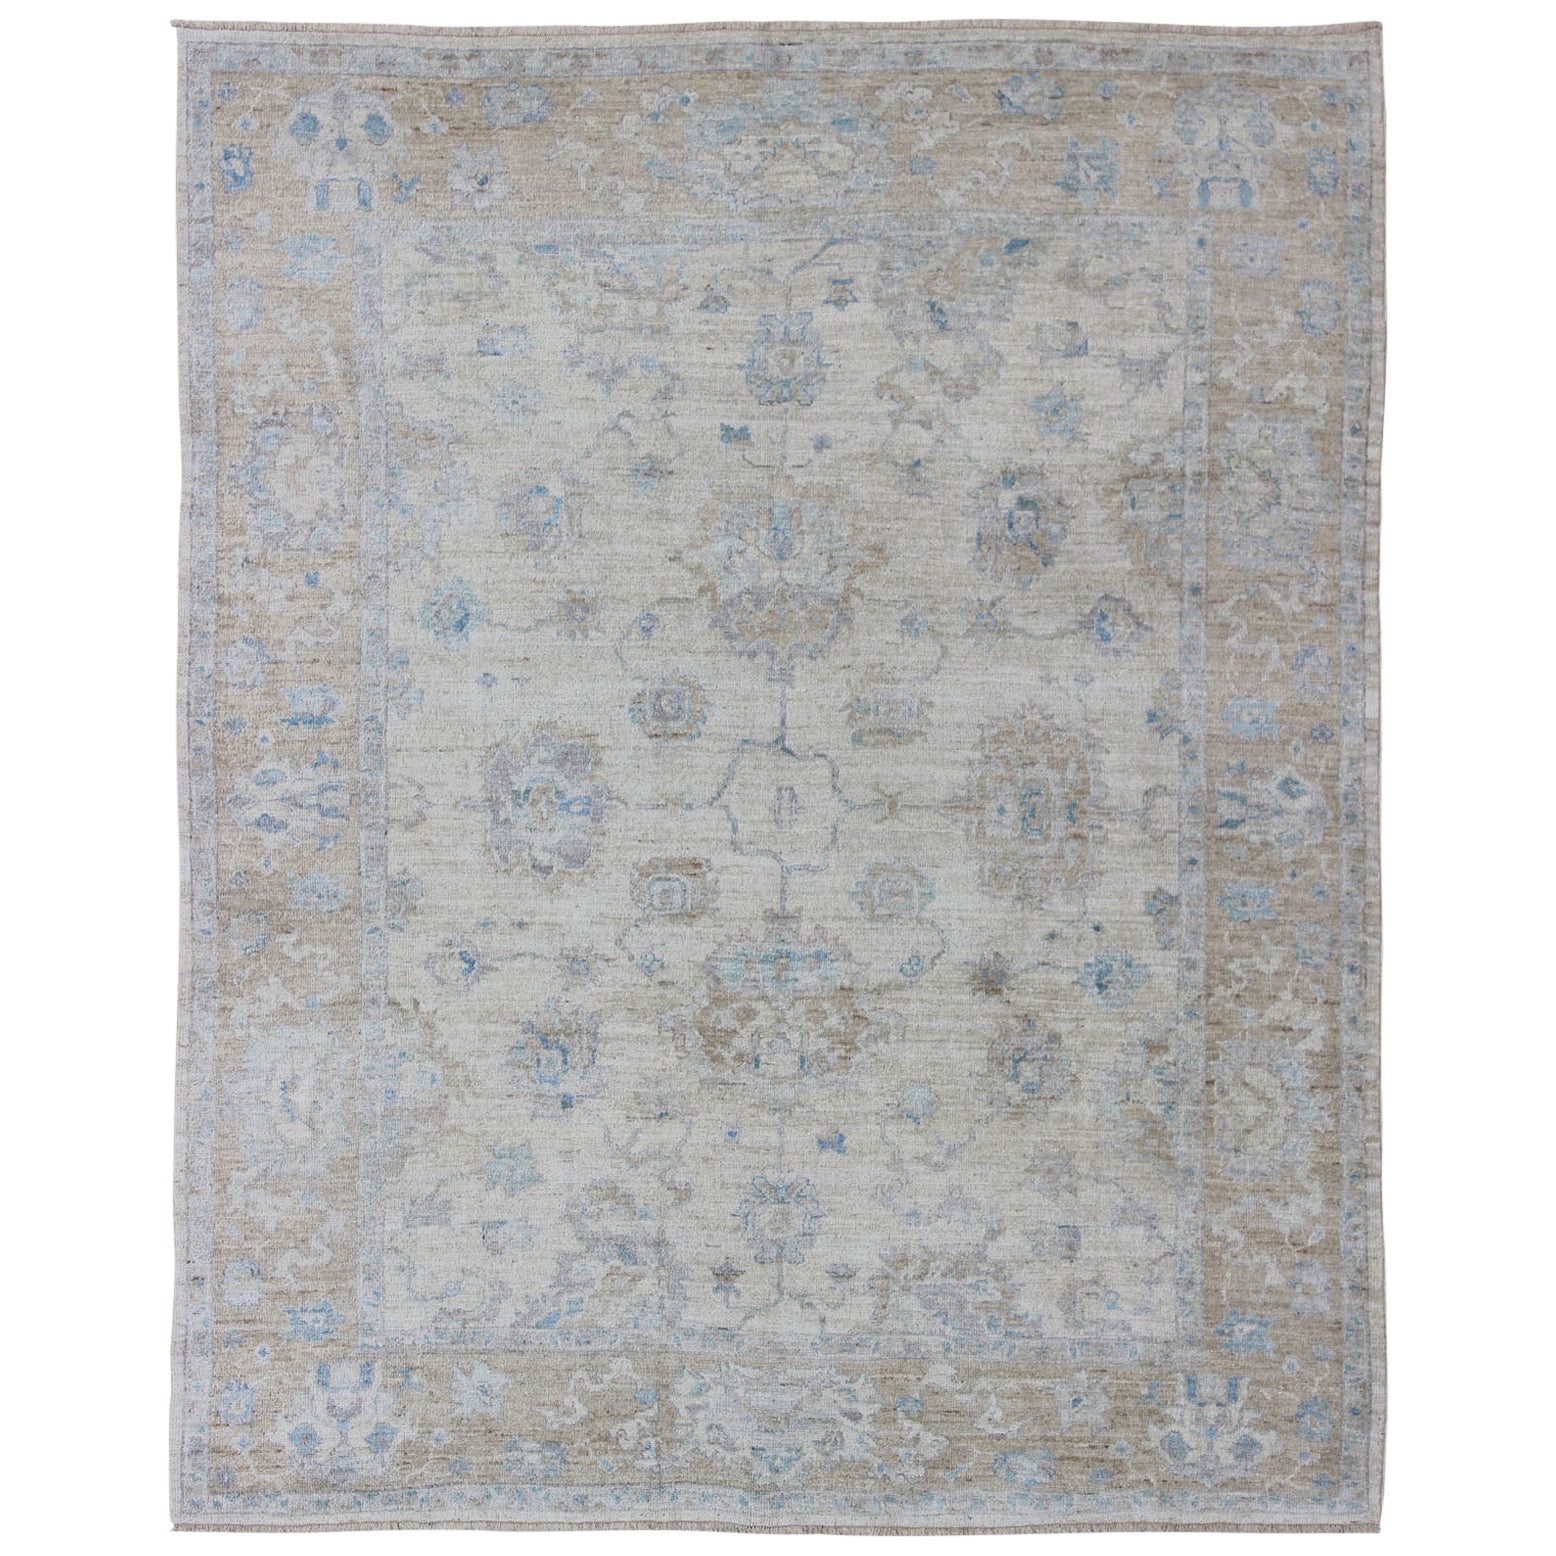 Angora Oushak Turkish Rug in Cream, Taupe, Silver, Light Brown Light Blue Colors For Sale